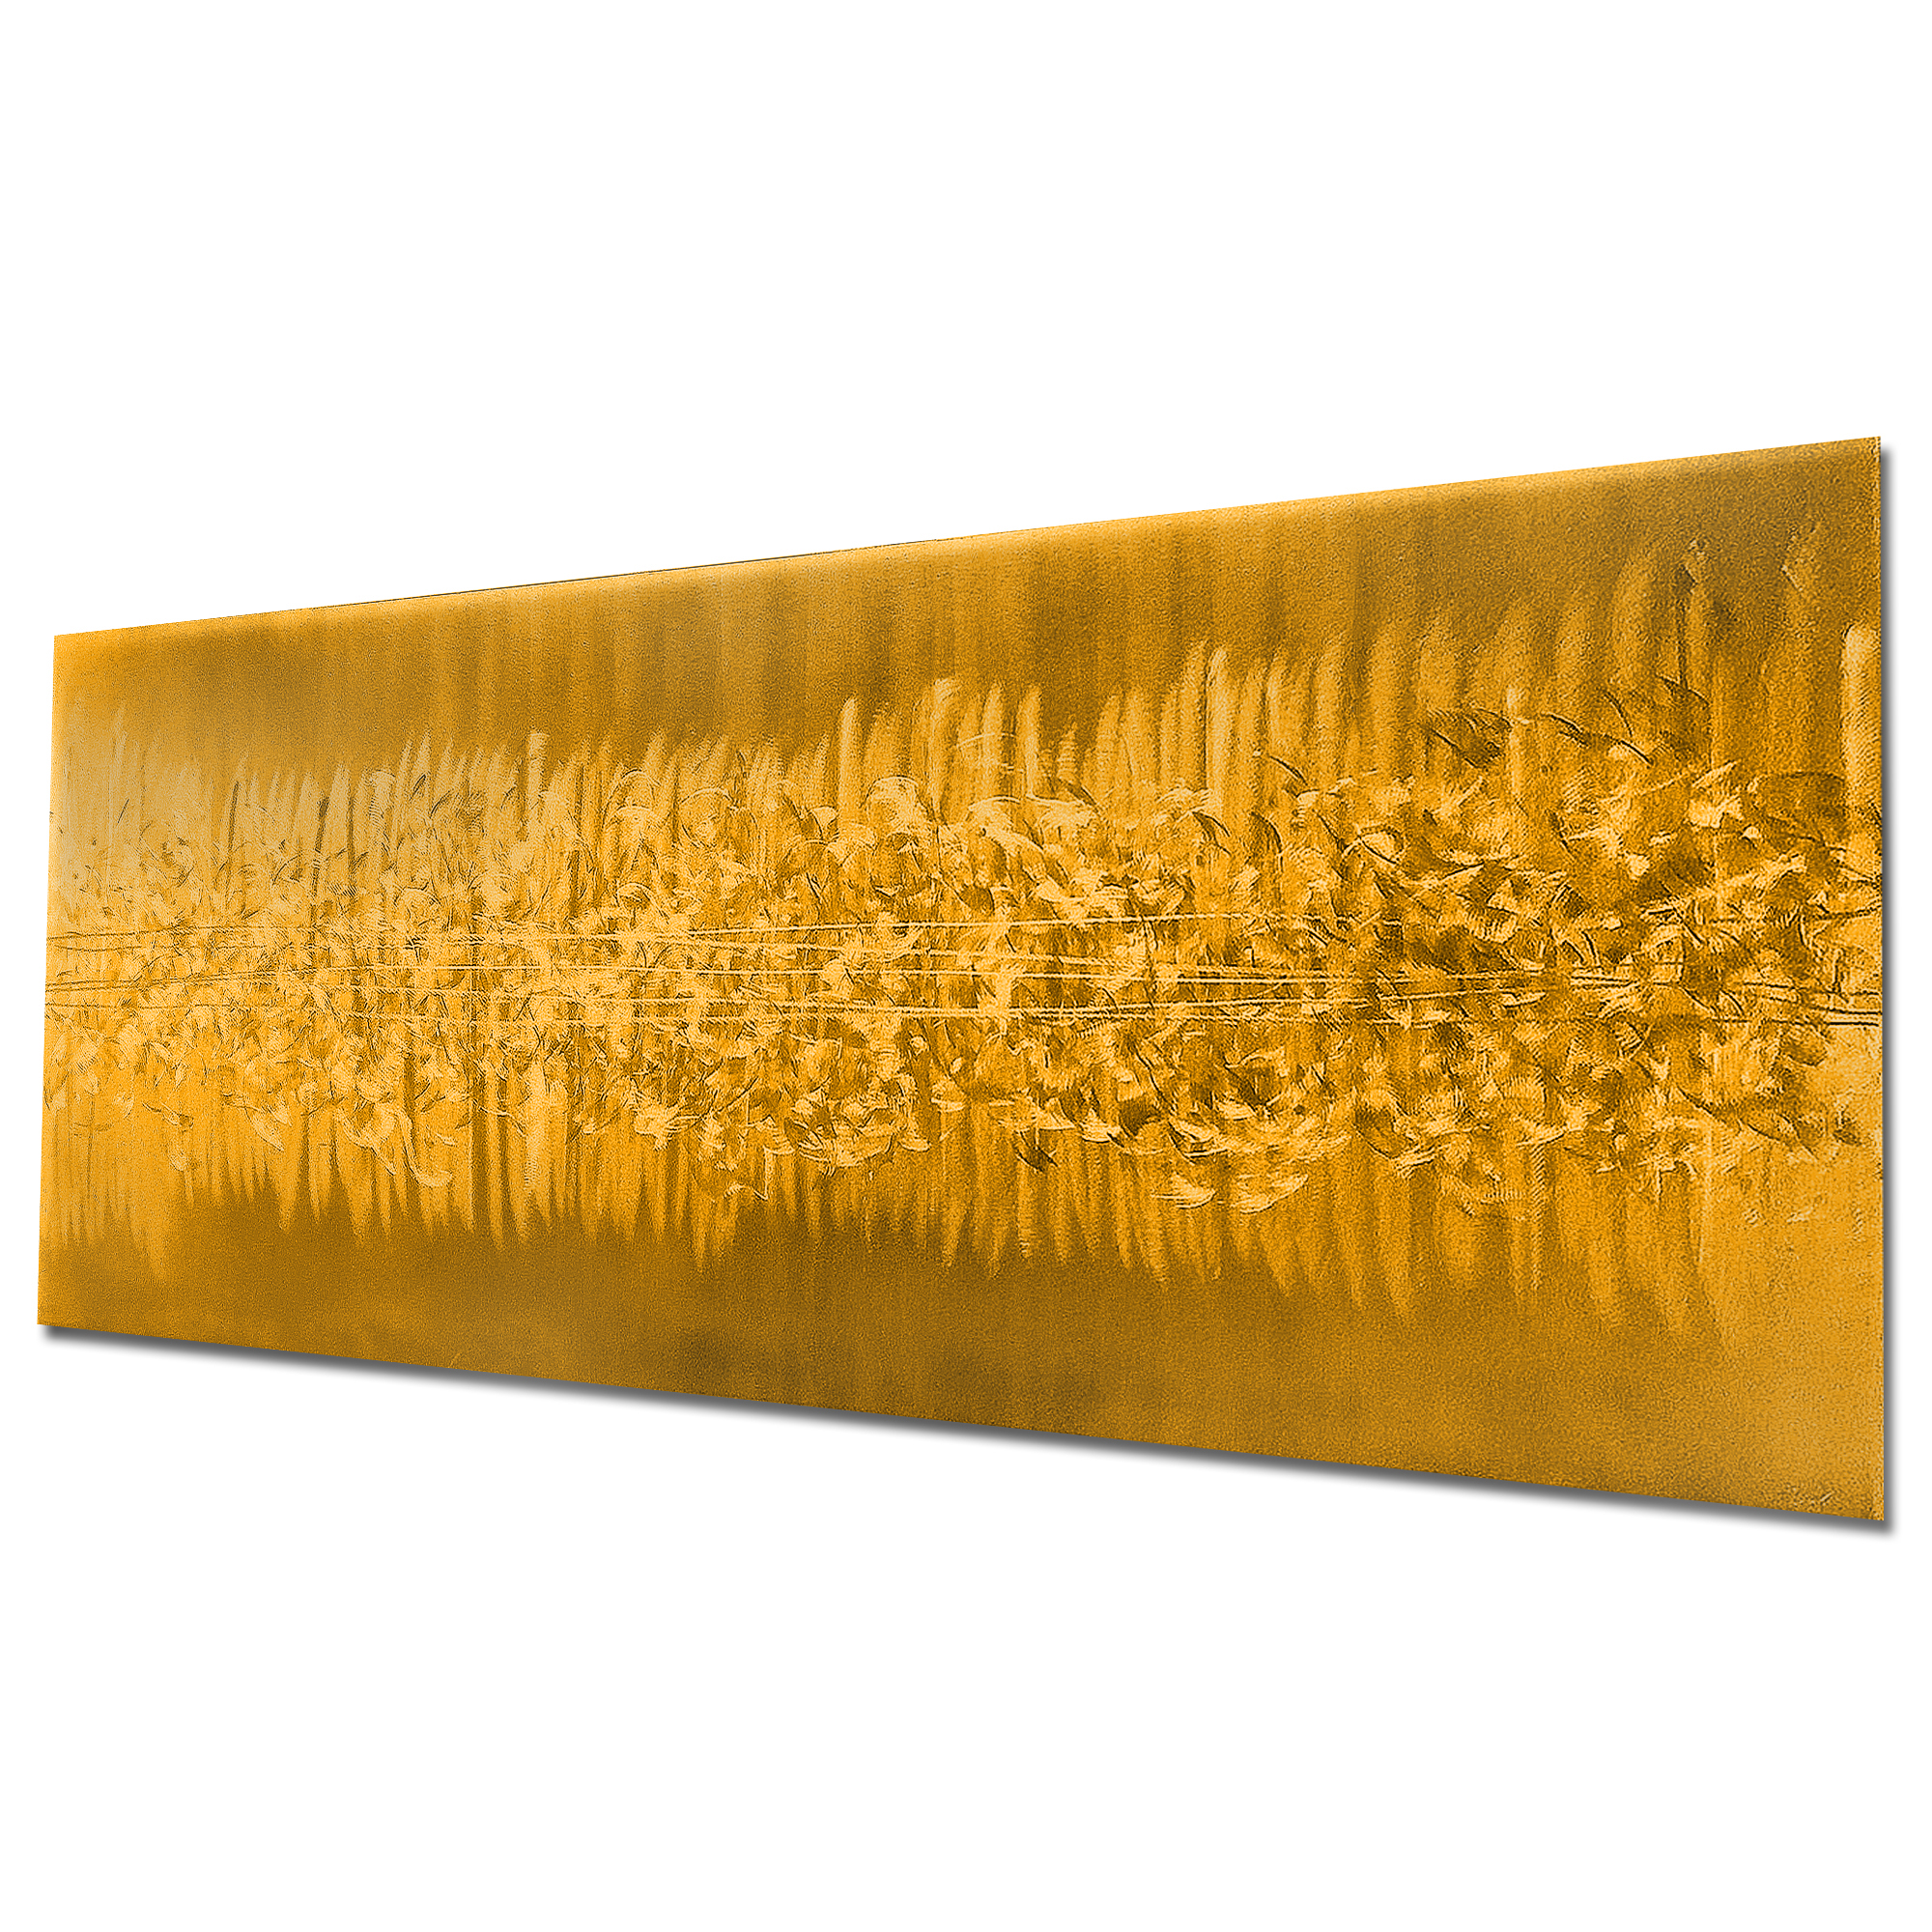 Static Gold by Helena Martin - Original Abstract Art on Ground and Painted Metal - Image 3